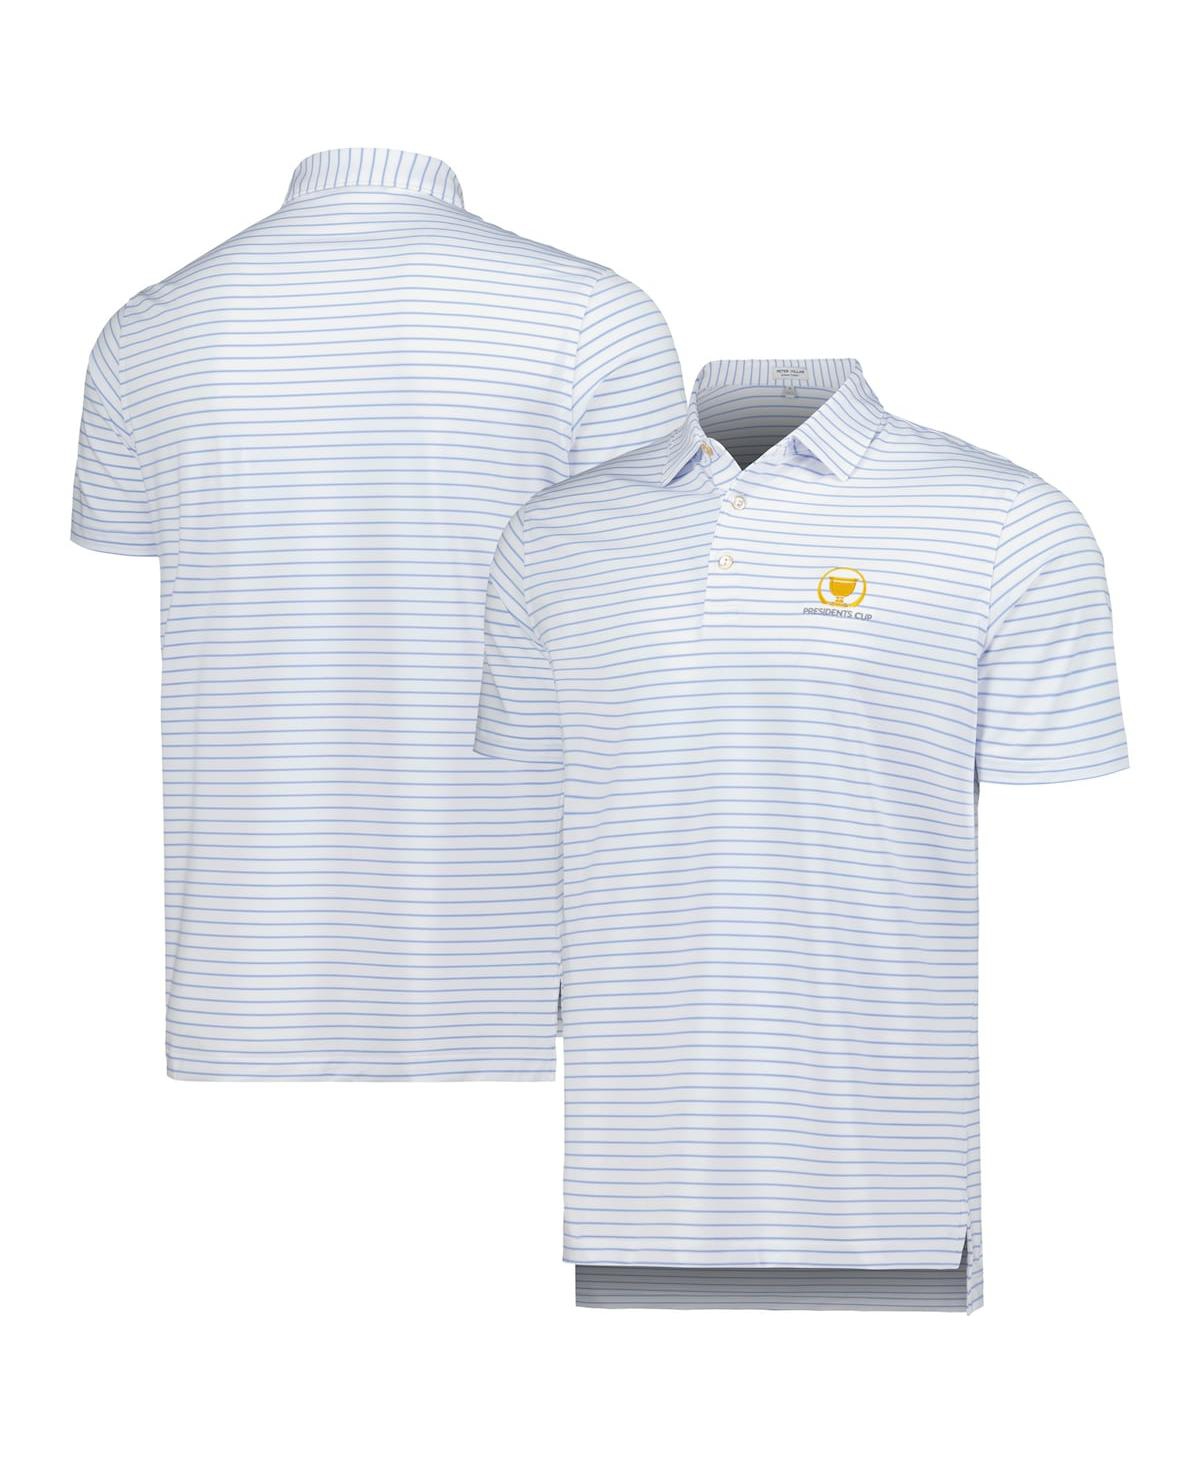 Men's White Presidents Cup Drum Performance Jersey Polo Shirt - White